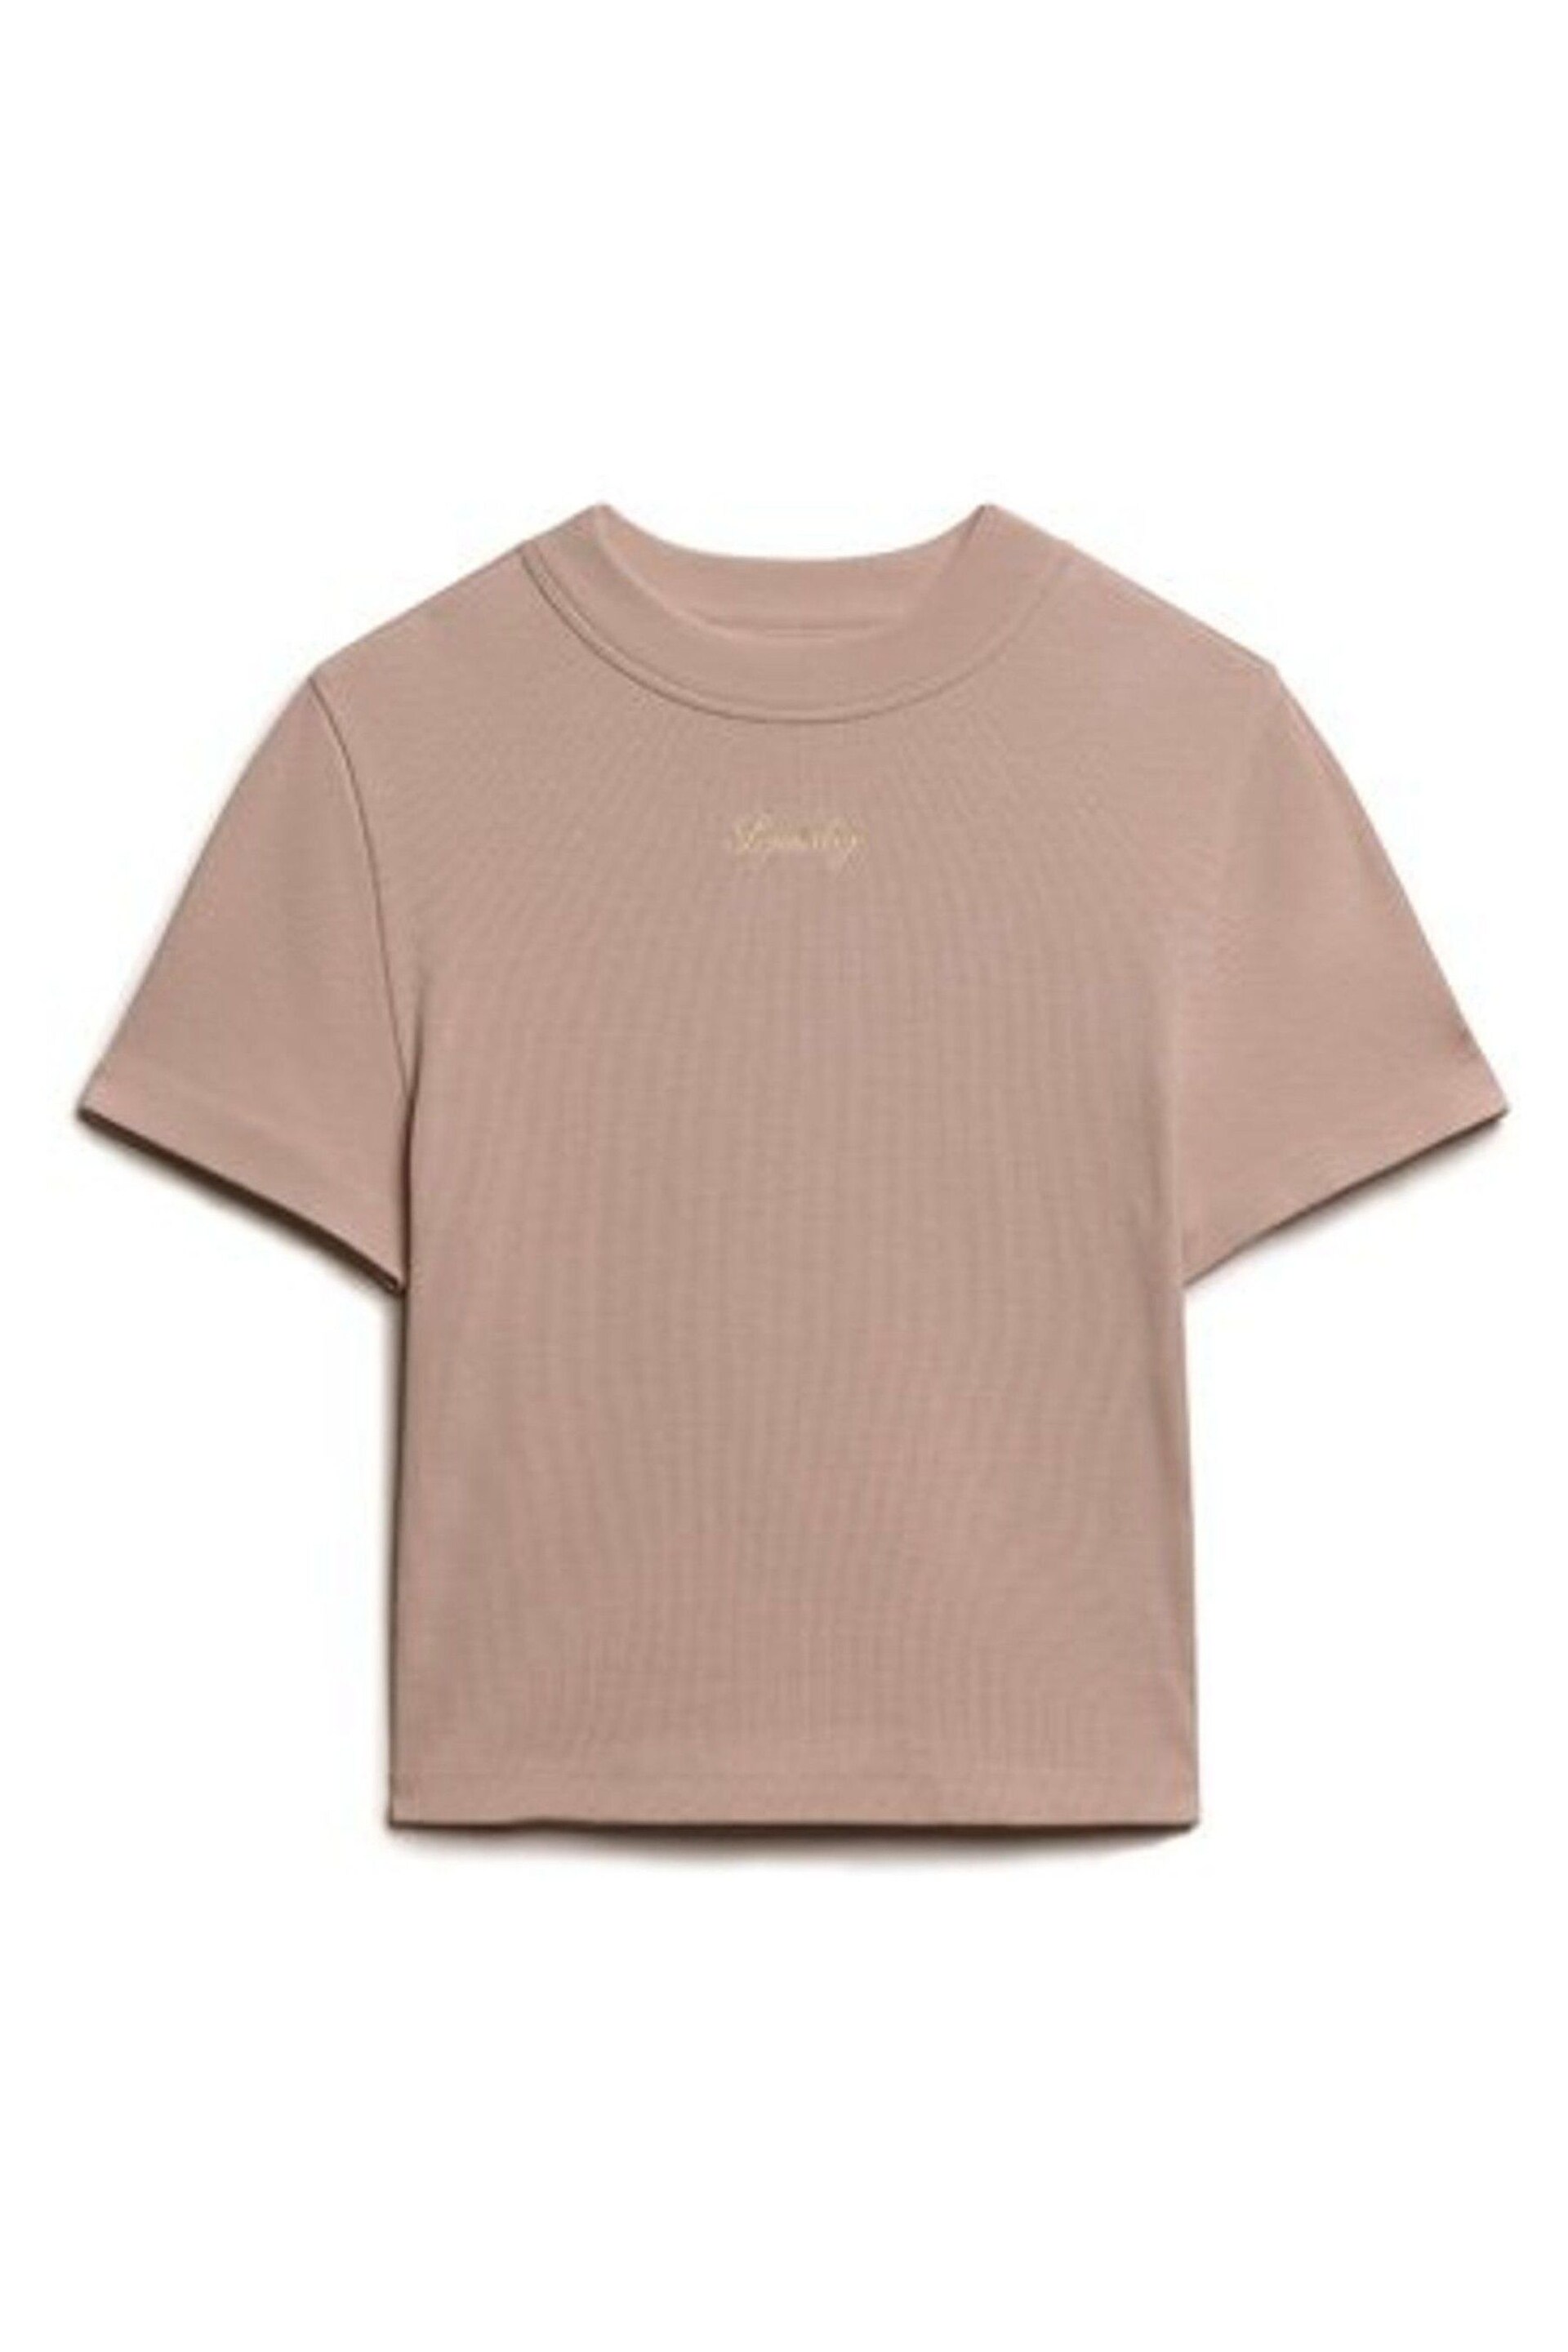 Superdry Light Brown Organic Cotton Ribbed Embroidered Fitted T-Shirt - Image 4 of 5